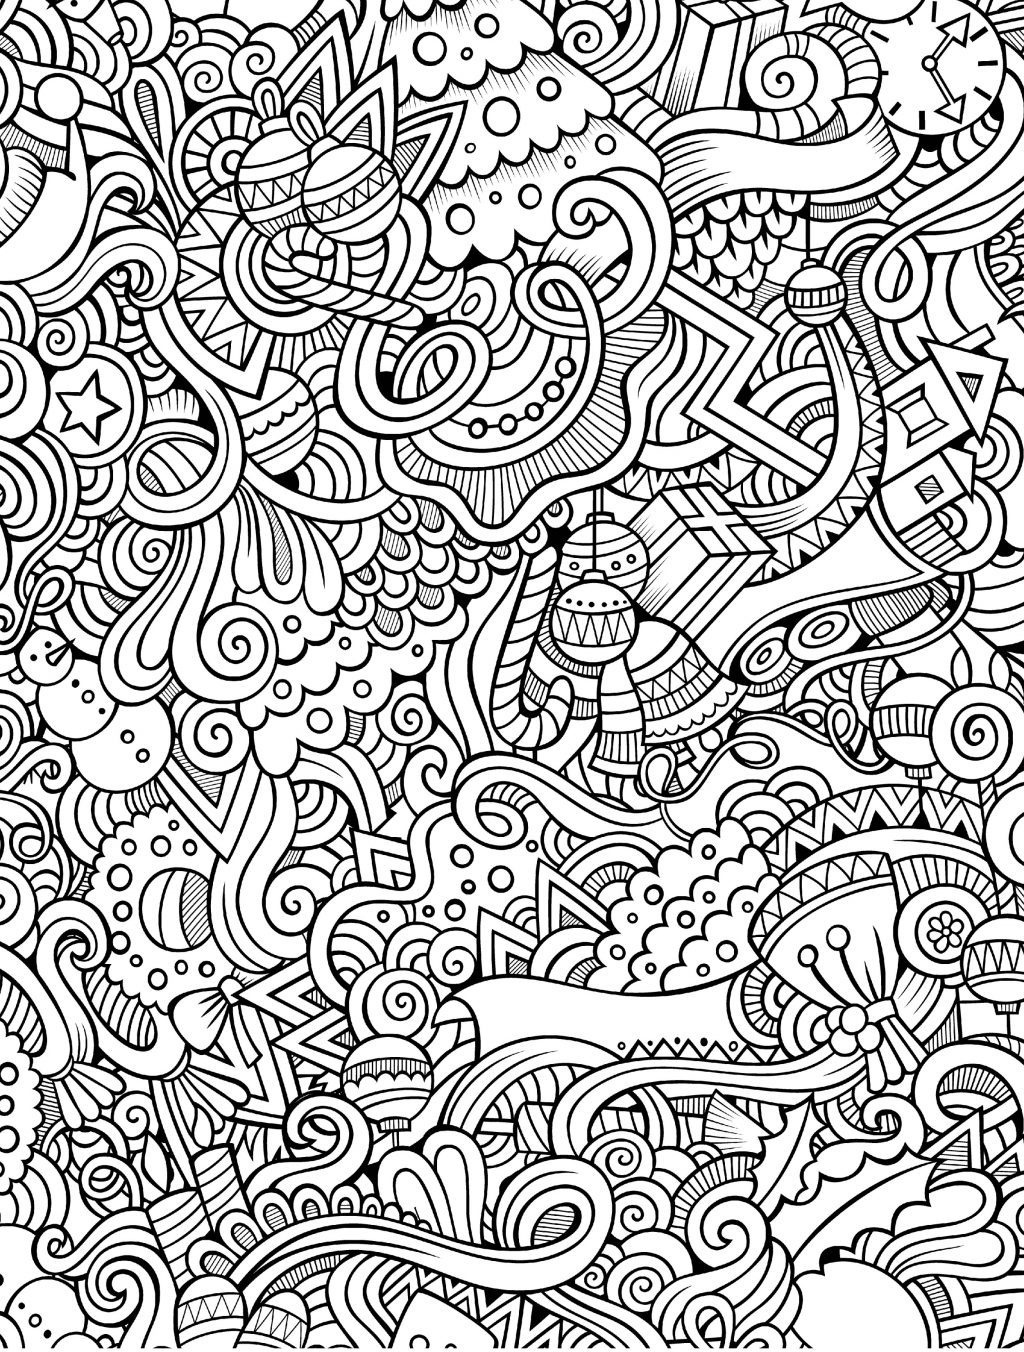 Coloring Ideas : Coloring Book For Adults Pdf Page Cartoon Santa - Free Printable Coloring Books Pdf